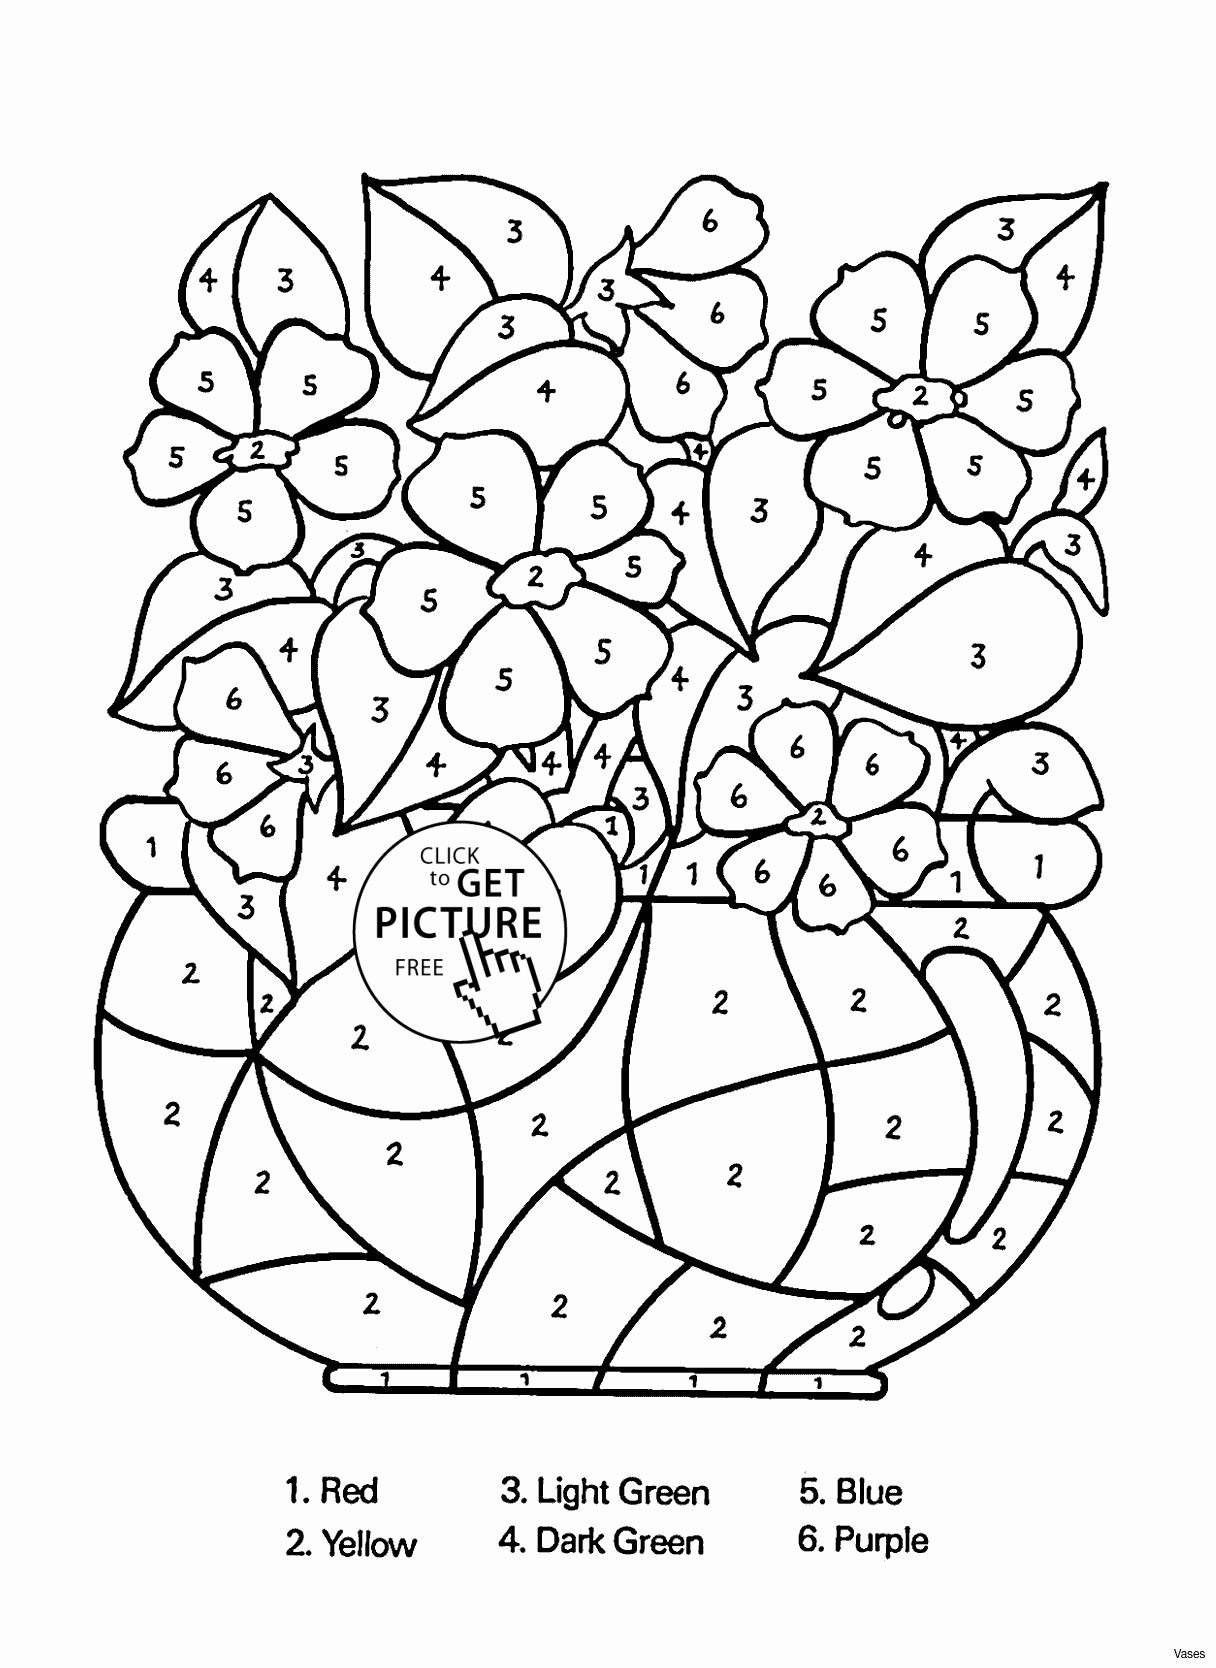 27 Stylish Navy Blue and White Vases 2024 free download navy blue and white vases of white porcelain vase lovely vases flower vase coloring page pages in white porcelain vase lovely vases flower vase coloring page pages flowers in a top i 0d